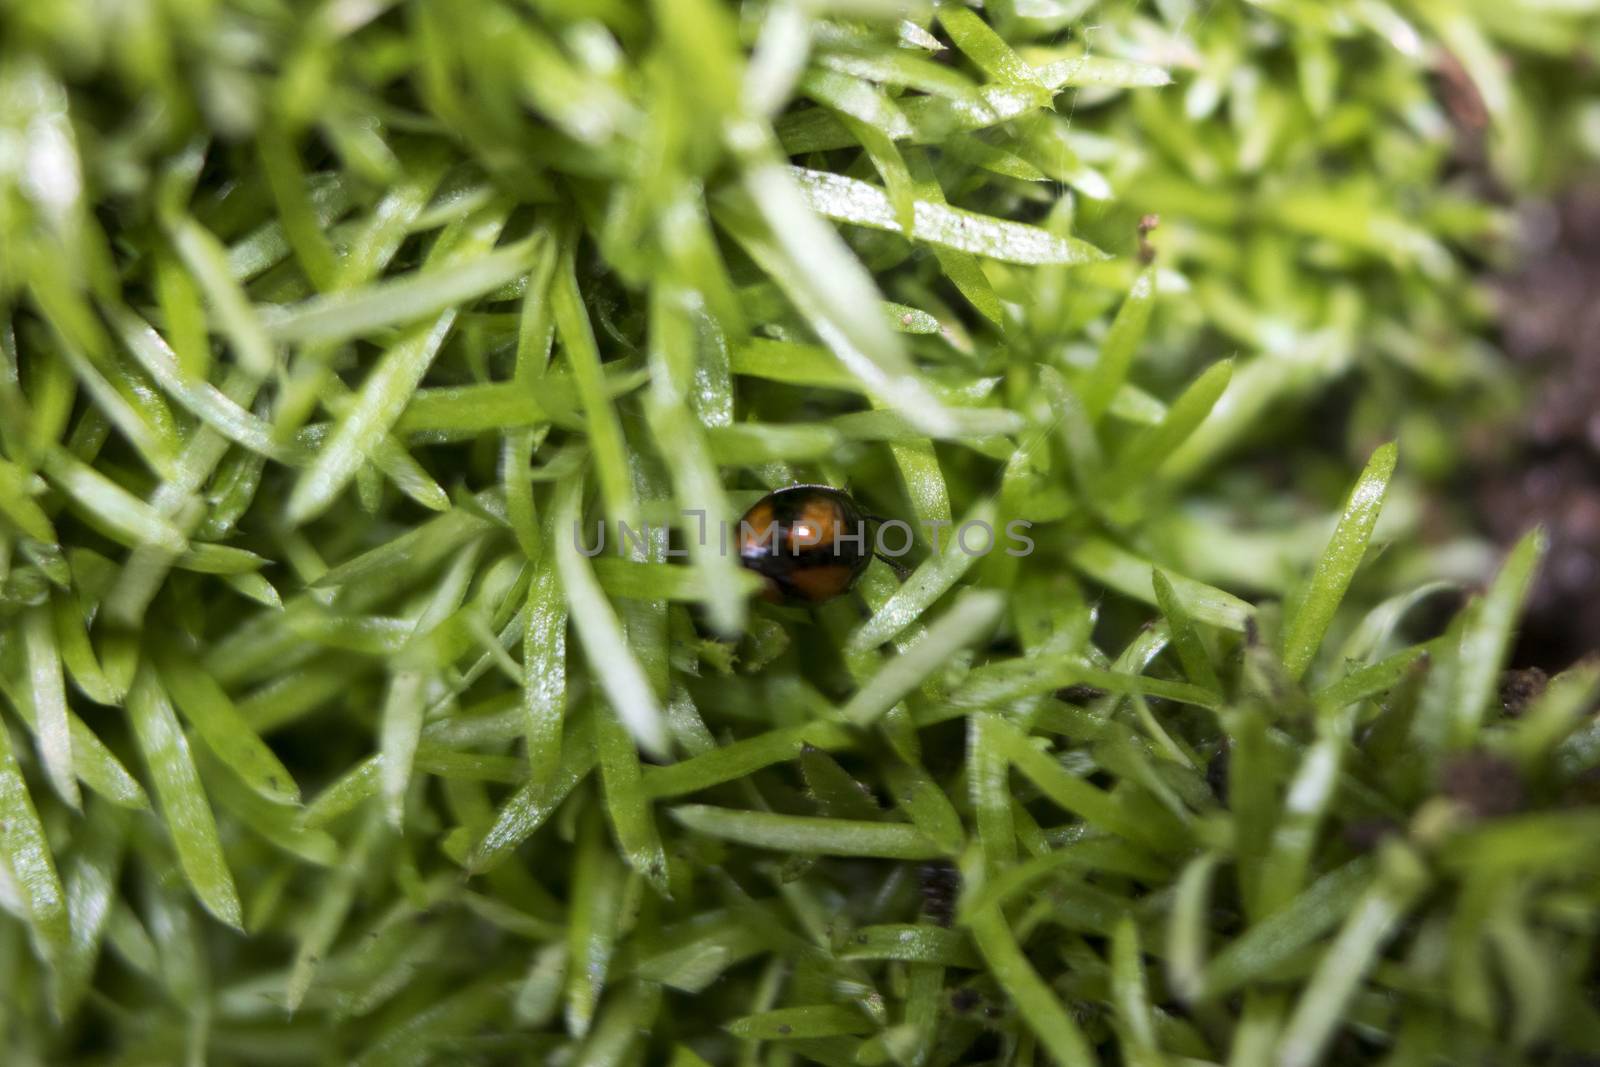 Little red ladybug crawling on a blade of grass on the green blurry background